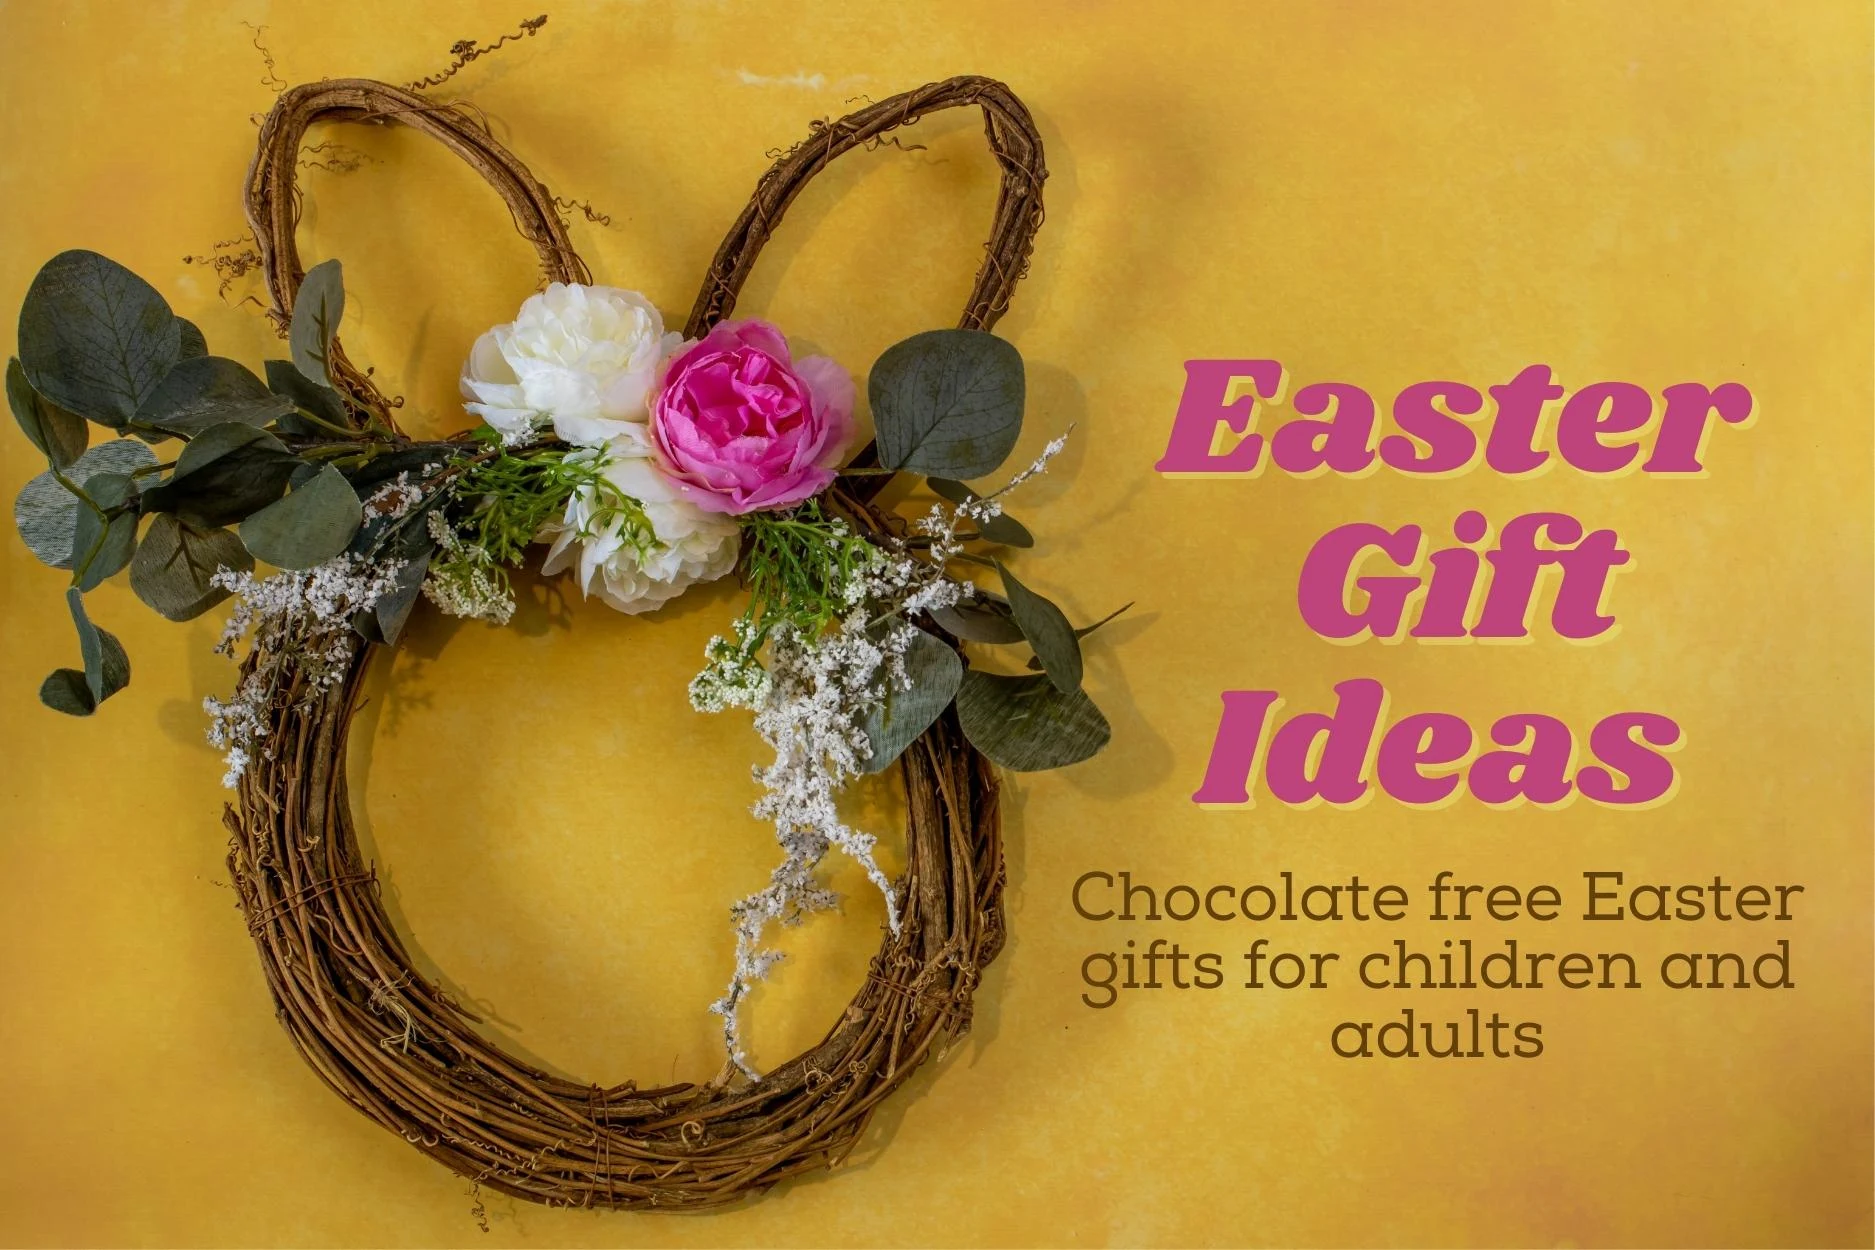 A bunny shape Easter wreath with artificial flowers on next to the message "Easter Gift Ideas: Chocolate free Easter gifts for children and adults